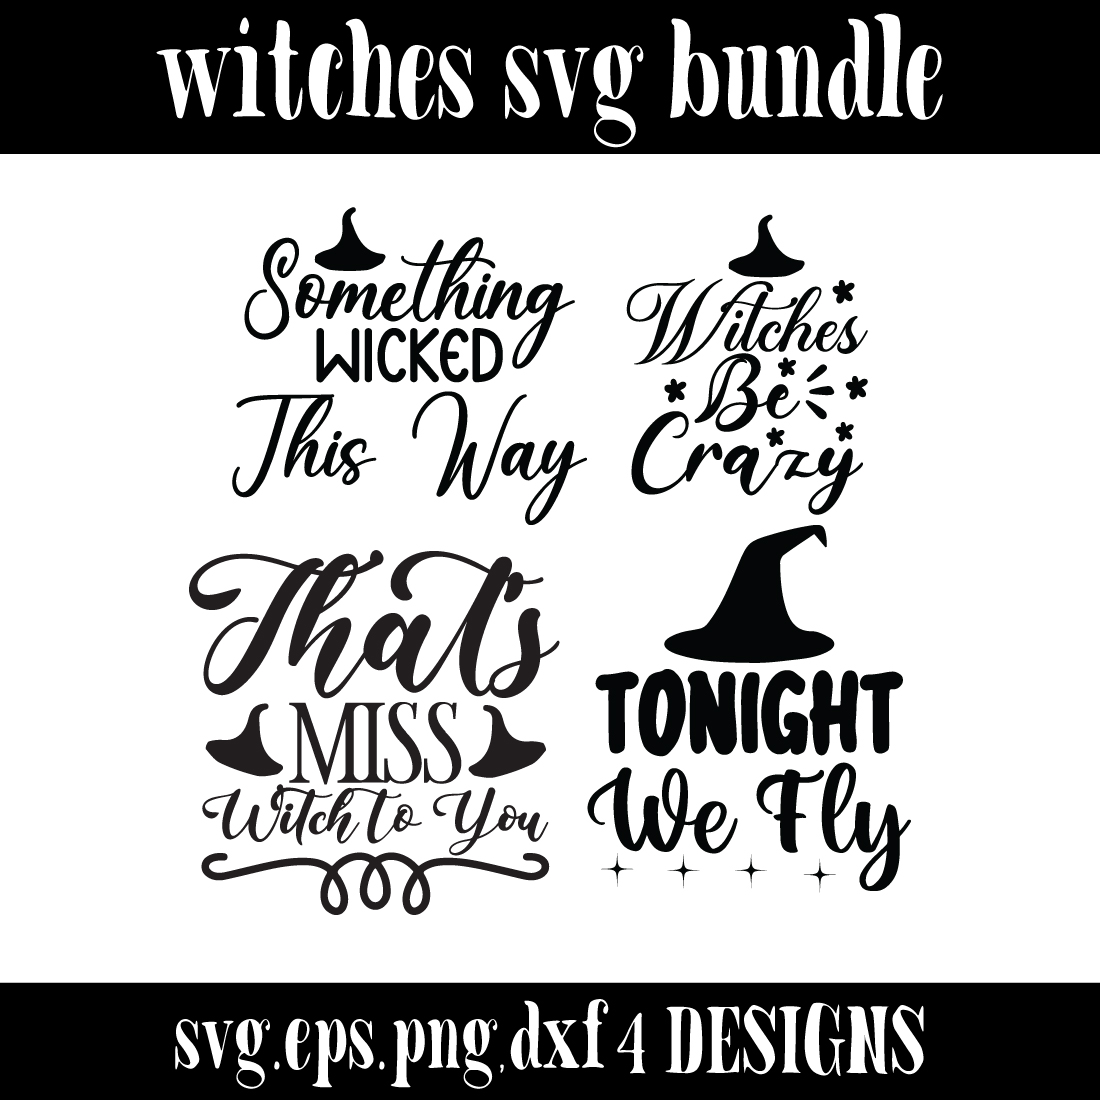 witches SVG bundle preview image.